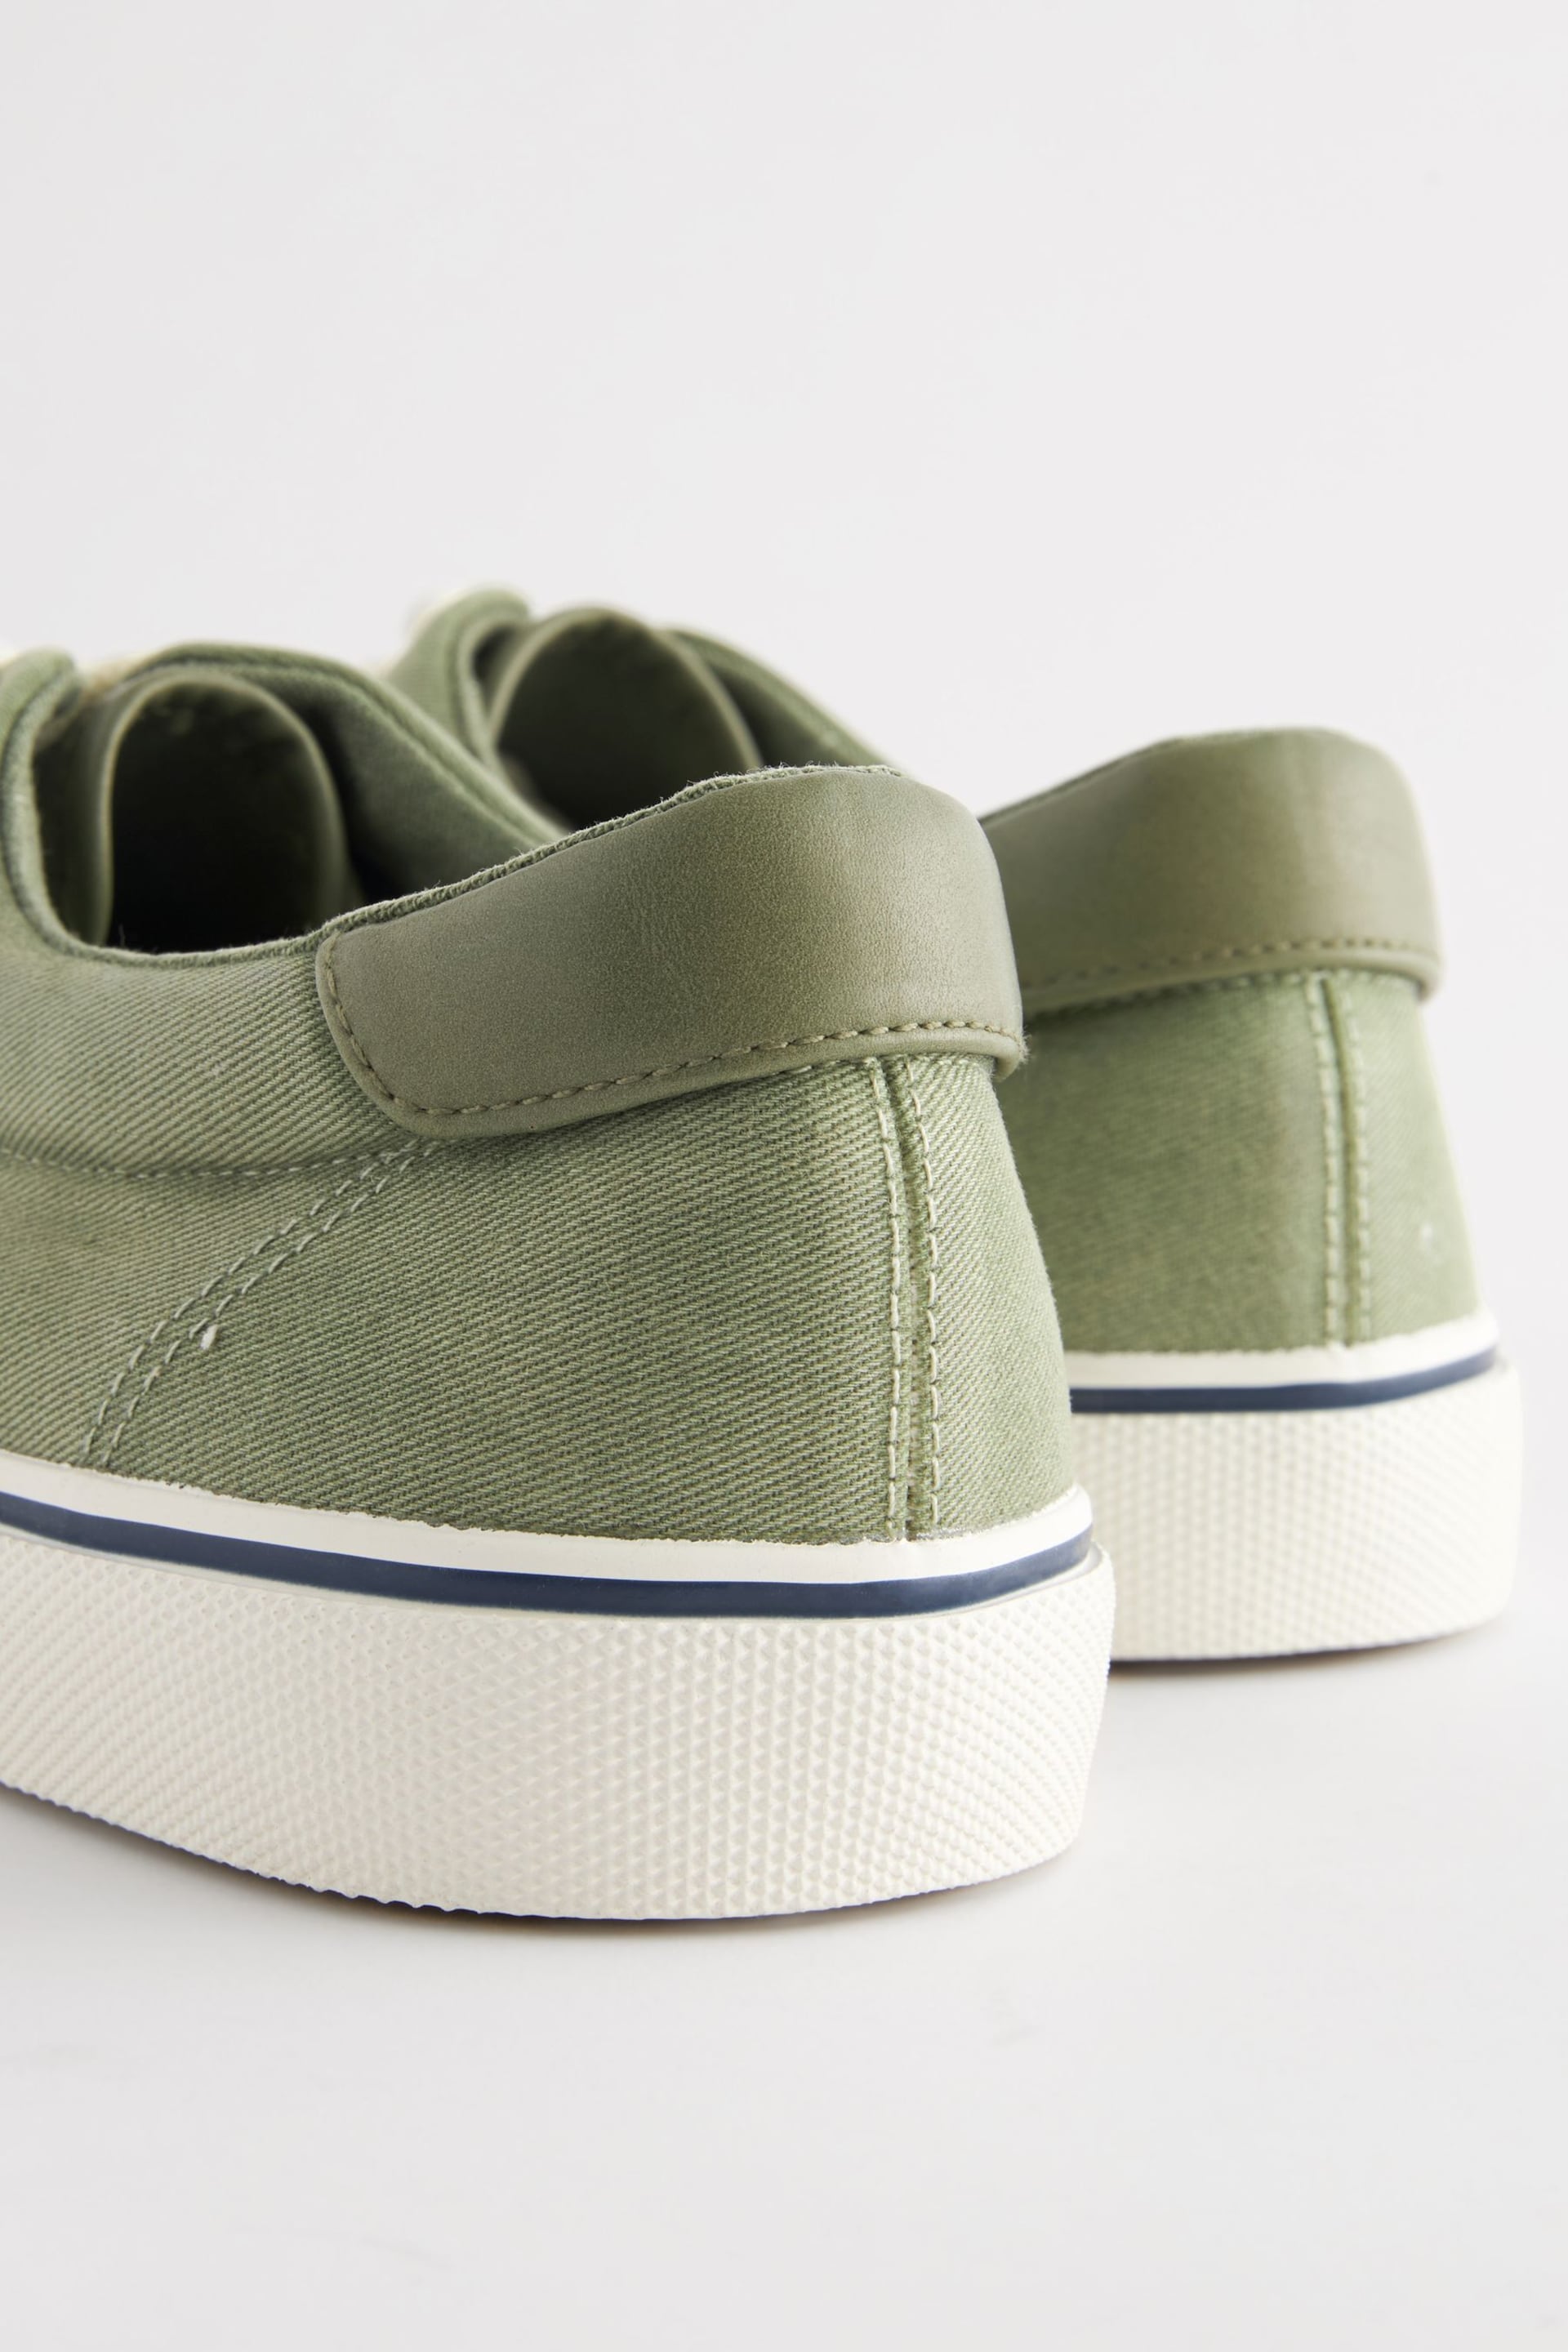 Green Washed Textile Trainers - Image 4 of 6